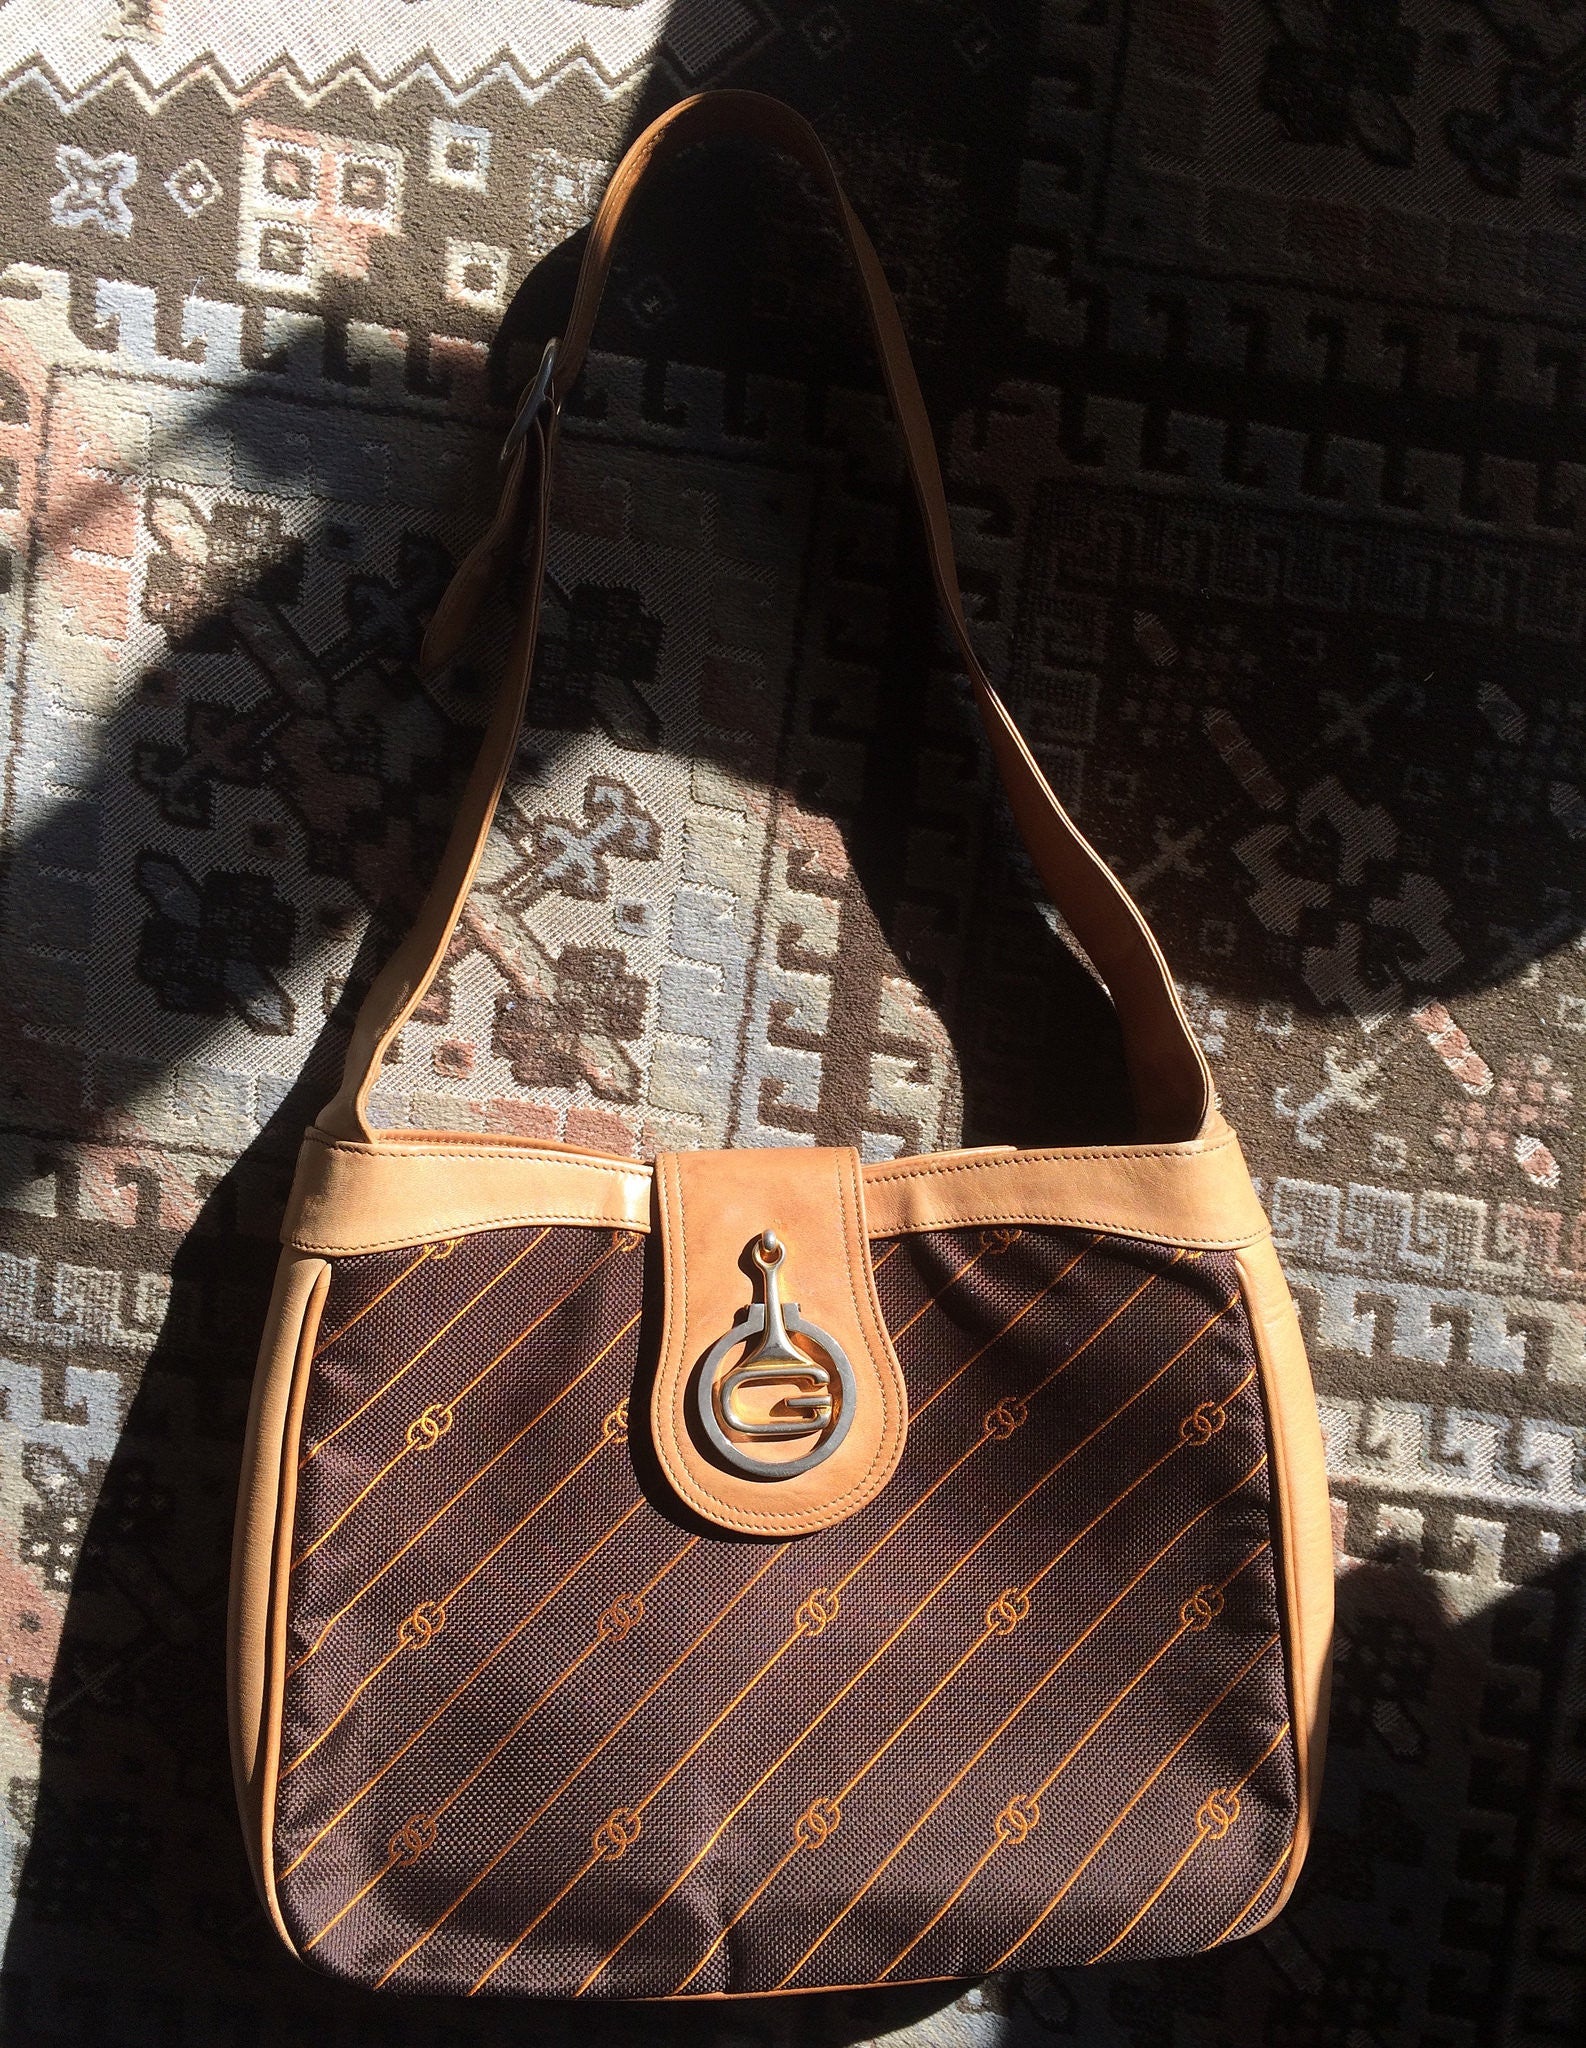 Gucci, Bags, Authentic Vintage Gucci Tote